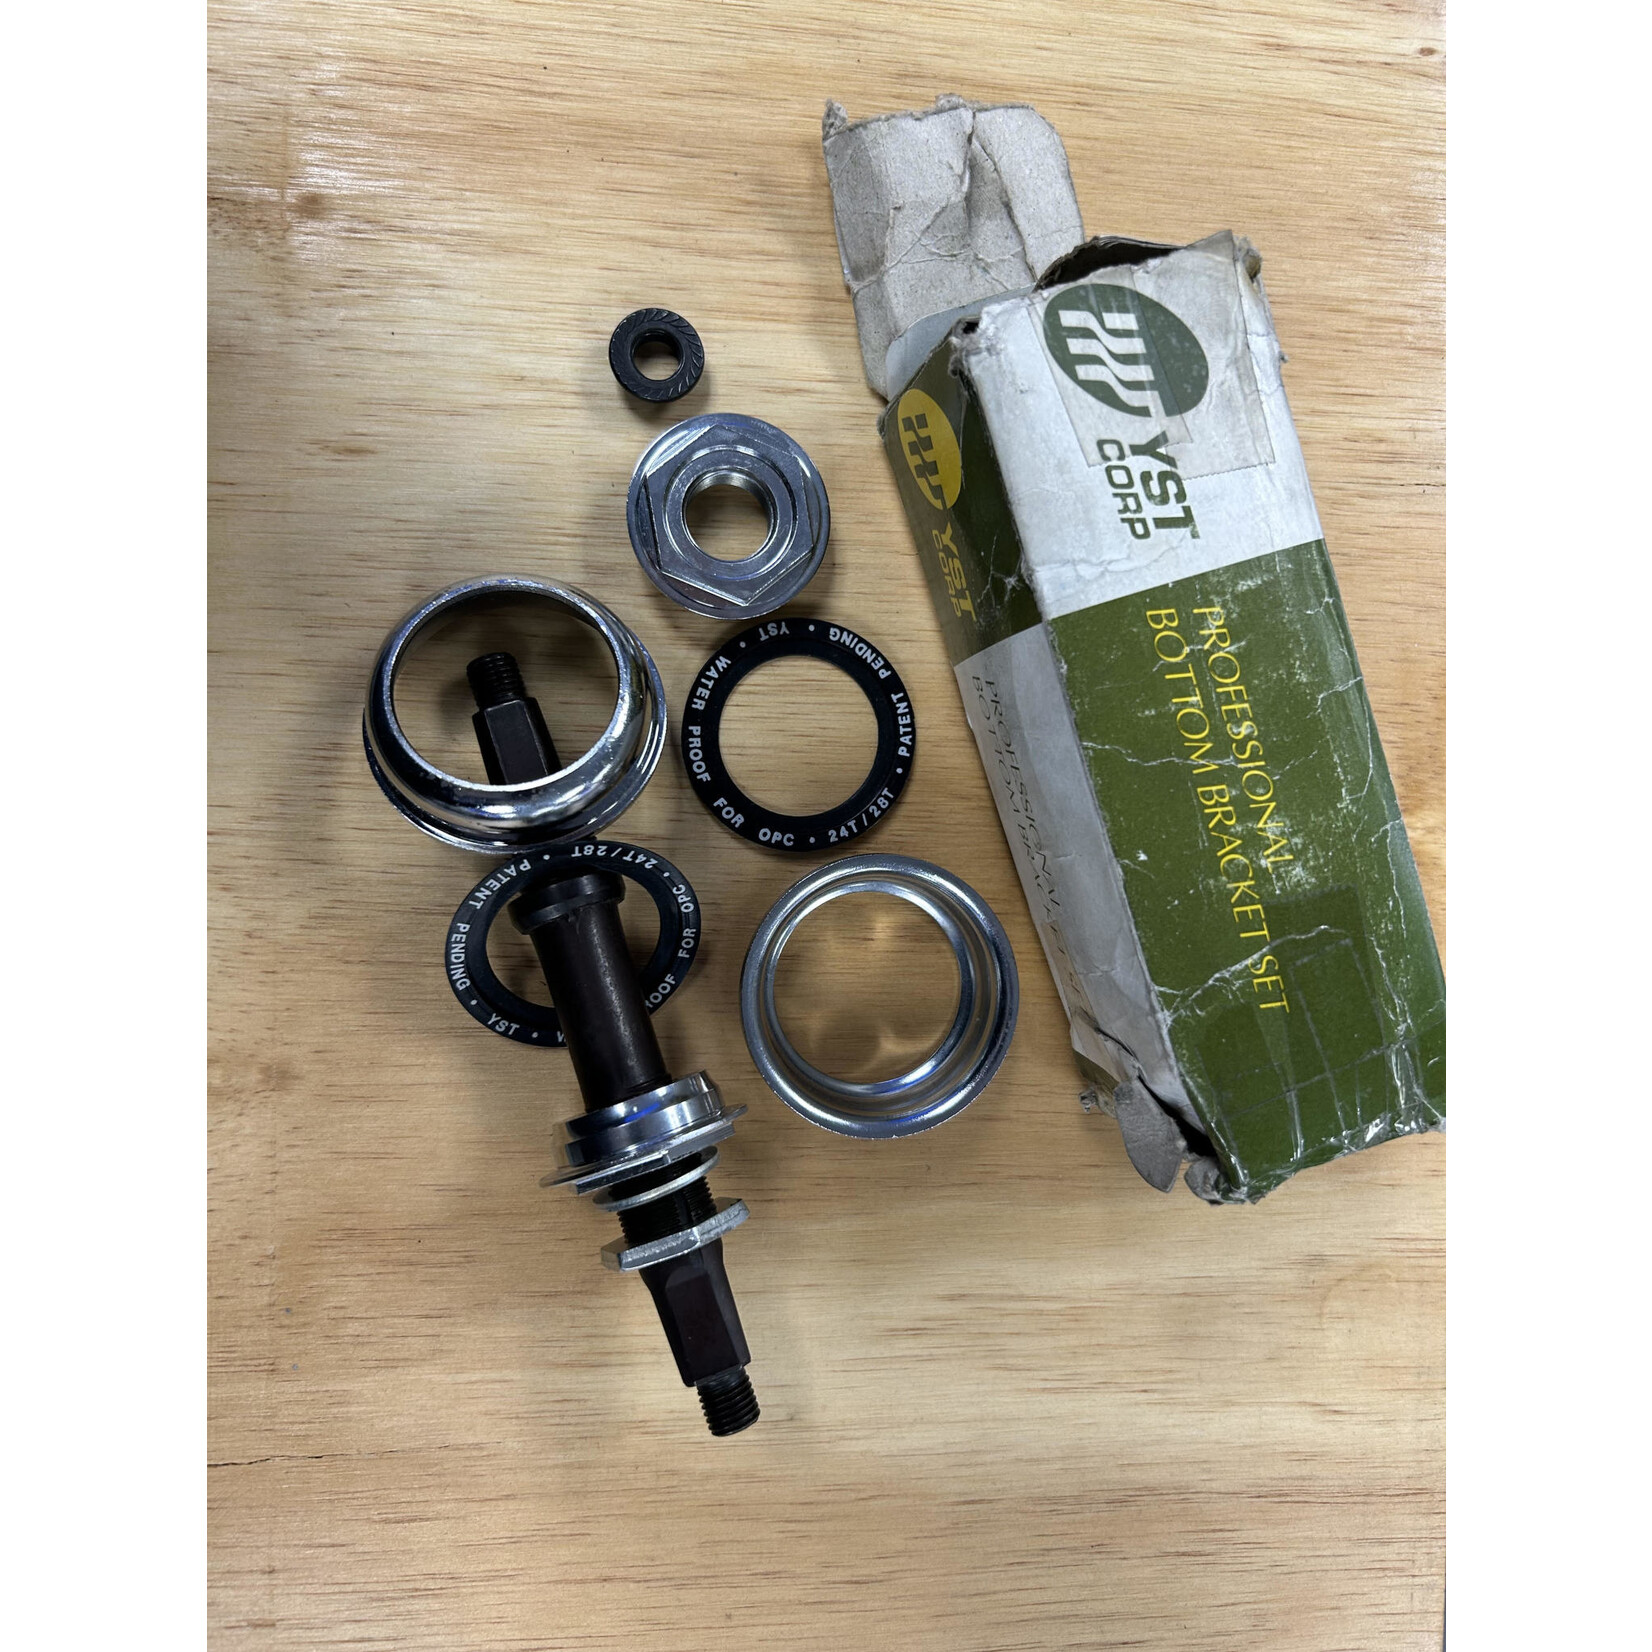 YST YST Corp Old School BMX American 130mm Spindle Square Taper Bottom Bracket